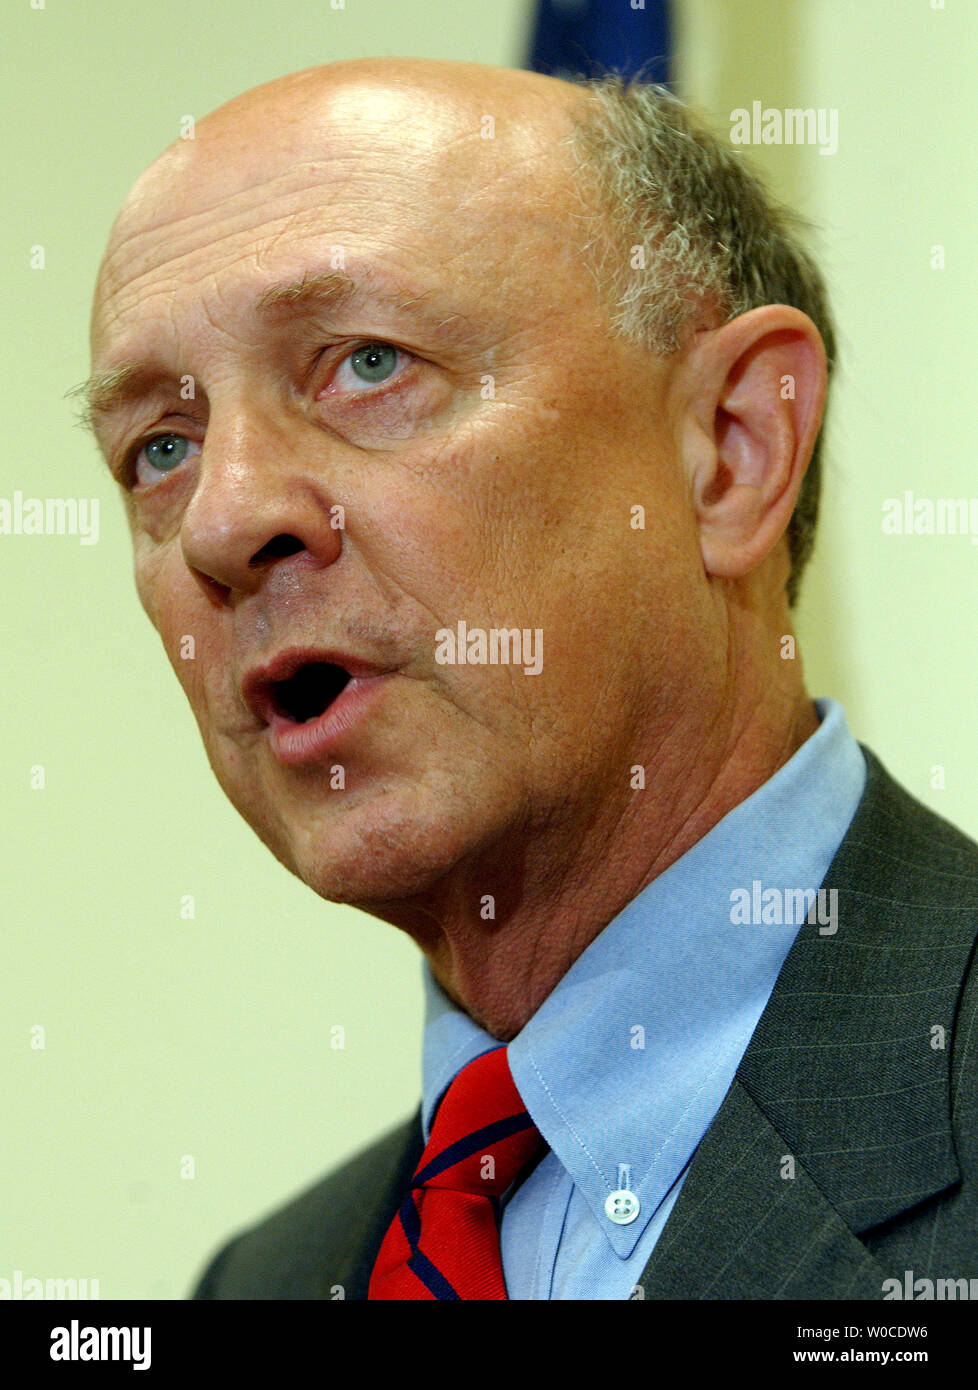 Former Director of Central Intellilgence R. James Woolsey discusses the new Committee on the Present Danger during a news conference on July 20, 2004, on Capitol Hill in Washington. Woolsey, the chairman of the committee, said the cold war-era concept has been revived to help advocate strong policies against the war on terrorism.   (UPI Photo/Roger L. Wollenberg) Stock Photo